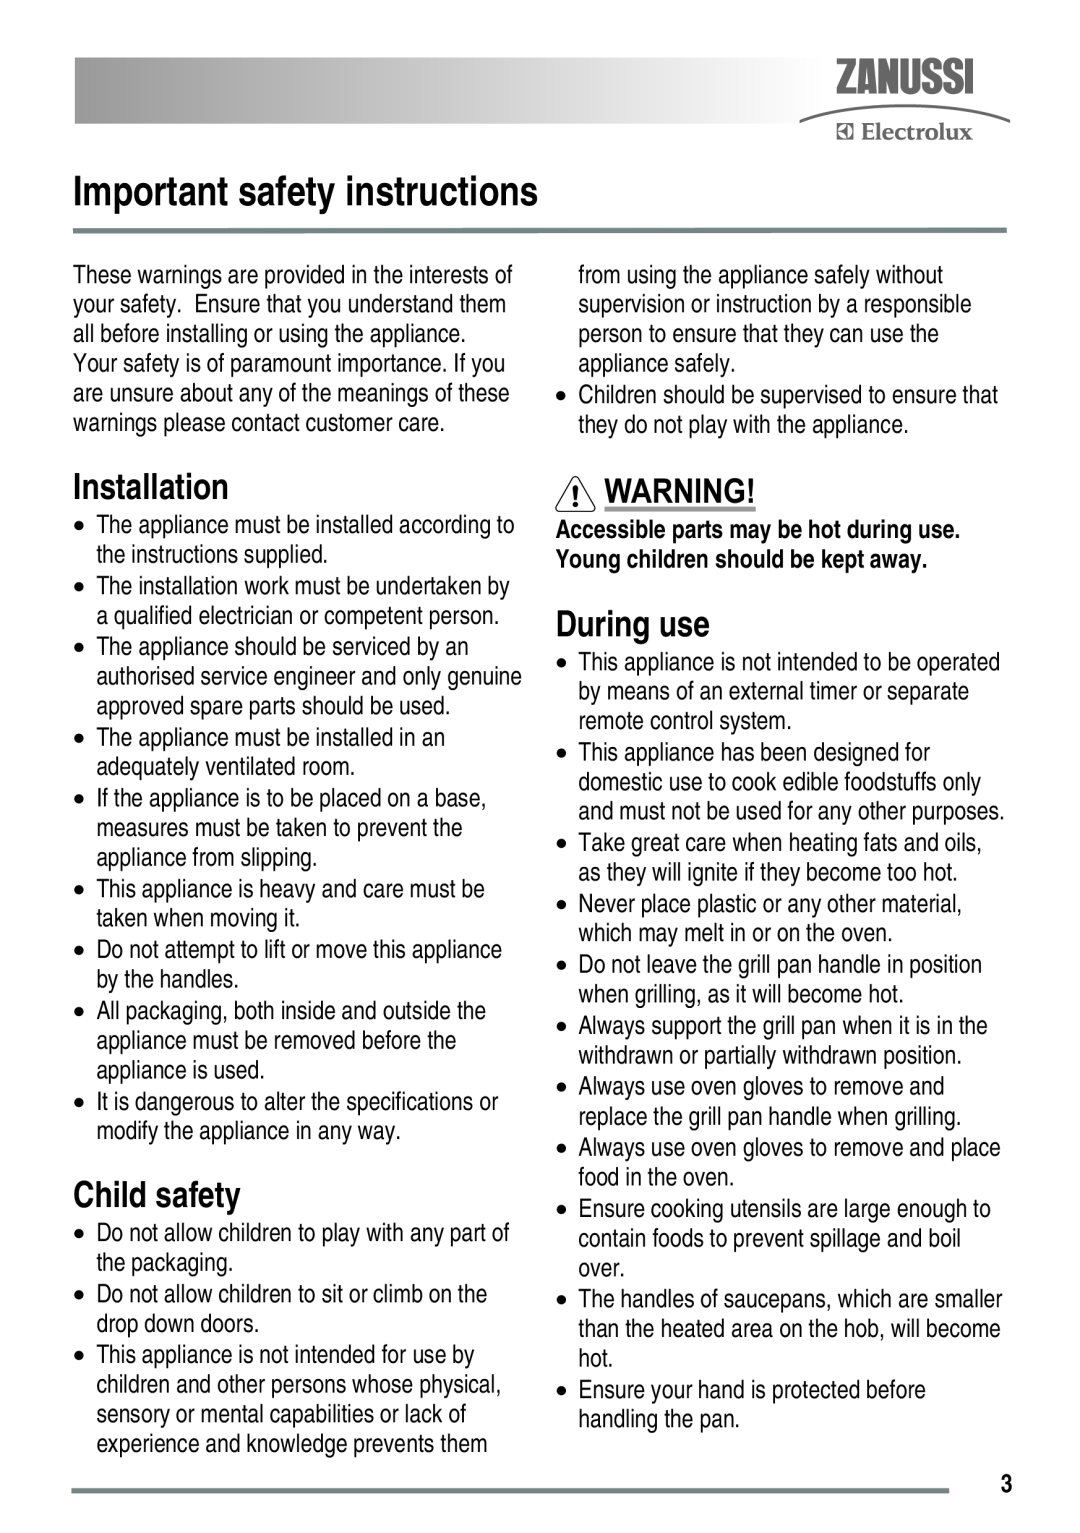 Zanussi ZKC5030 user manual Important safety instructions, Installation, Child safety, During use 